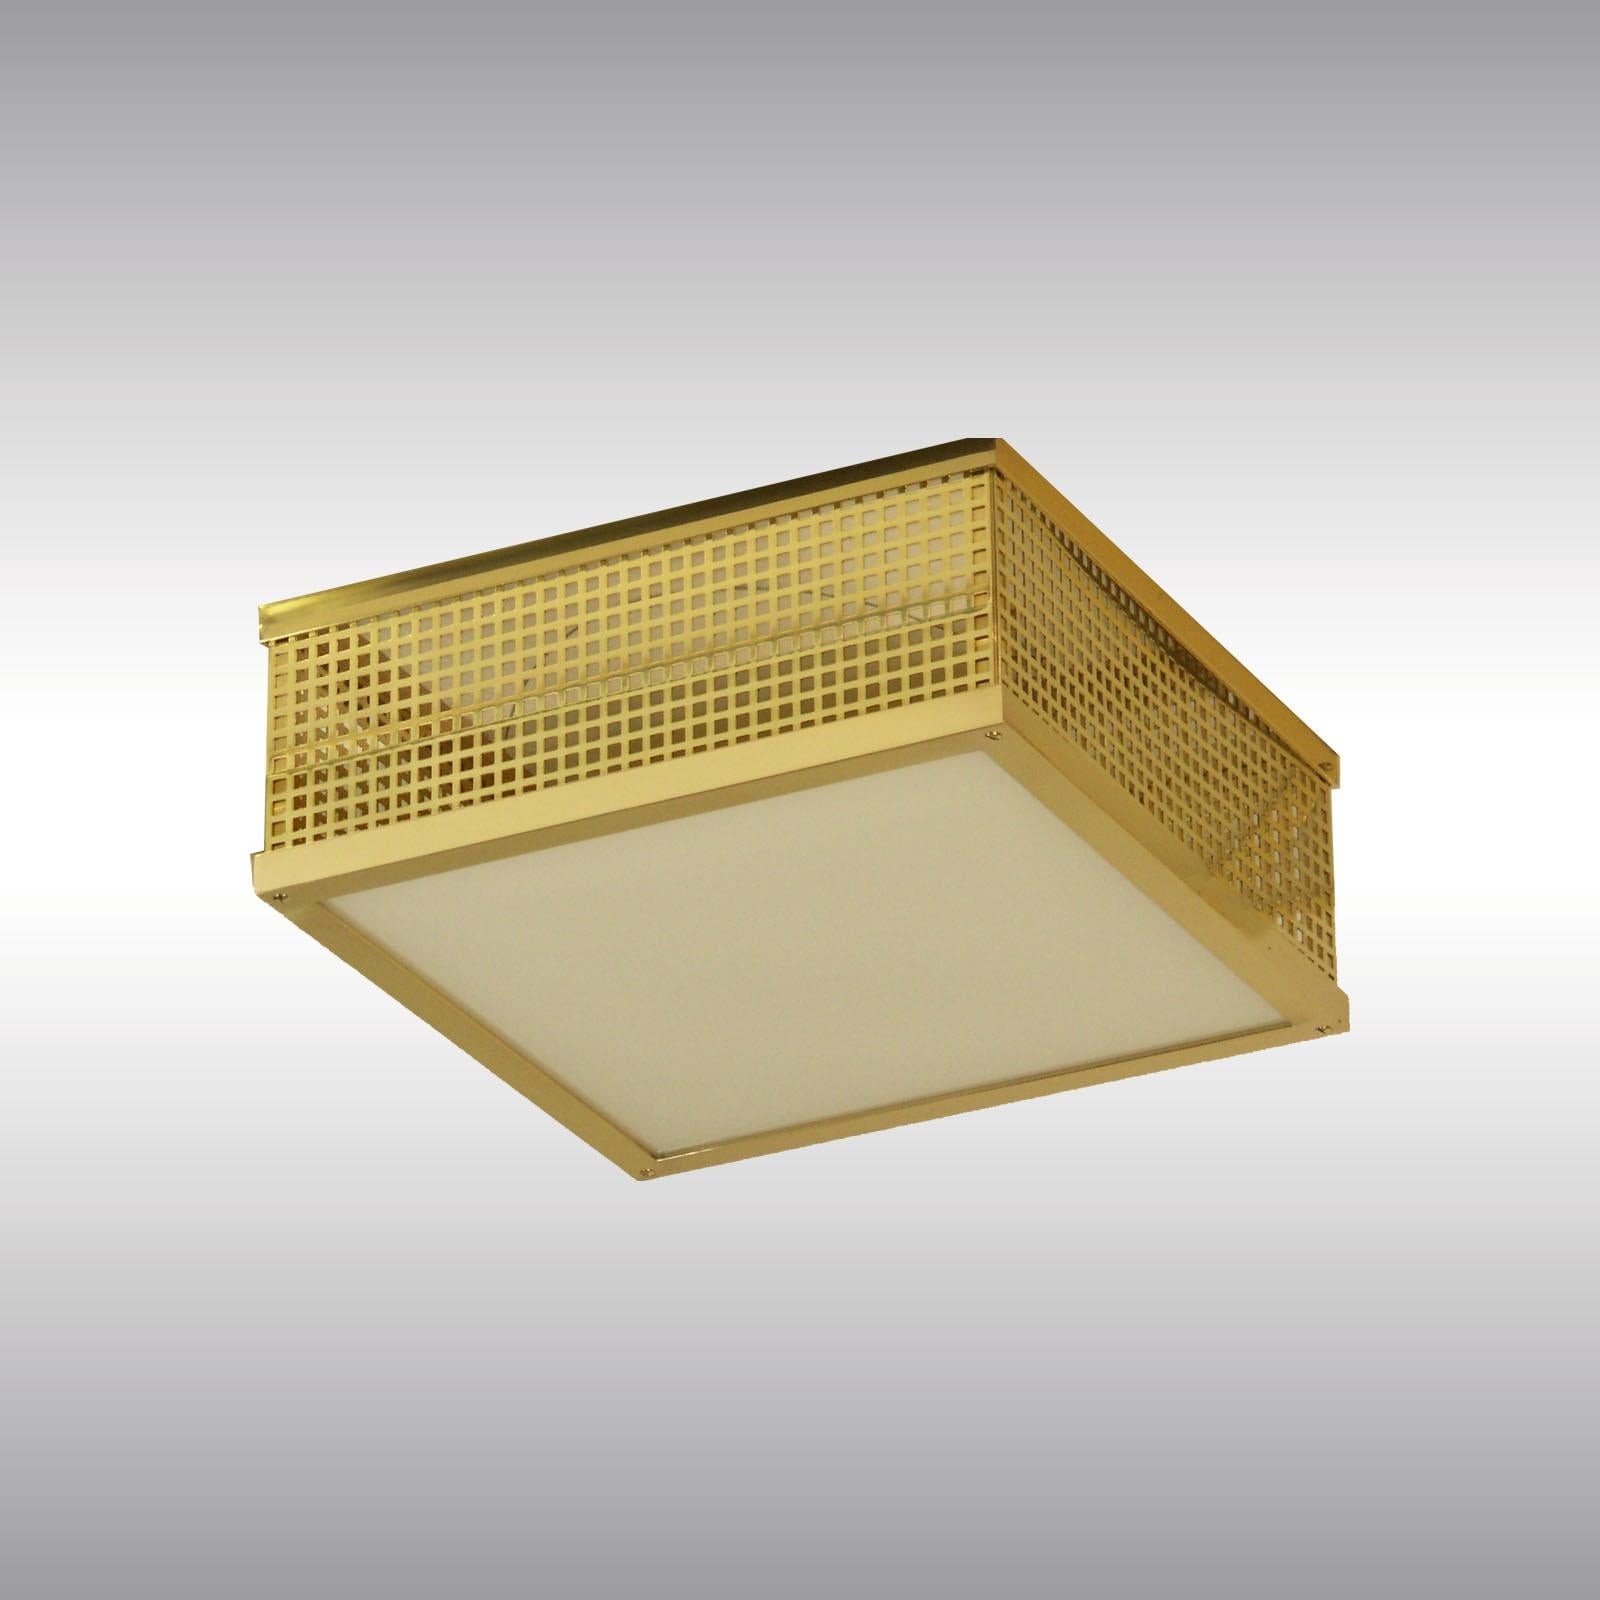 Square ceiling or wall fixture with punched brass-sheet in the requested finish

All components according to the UL regulations, with an additional charge we will UL-list and label our fixtures.